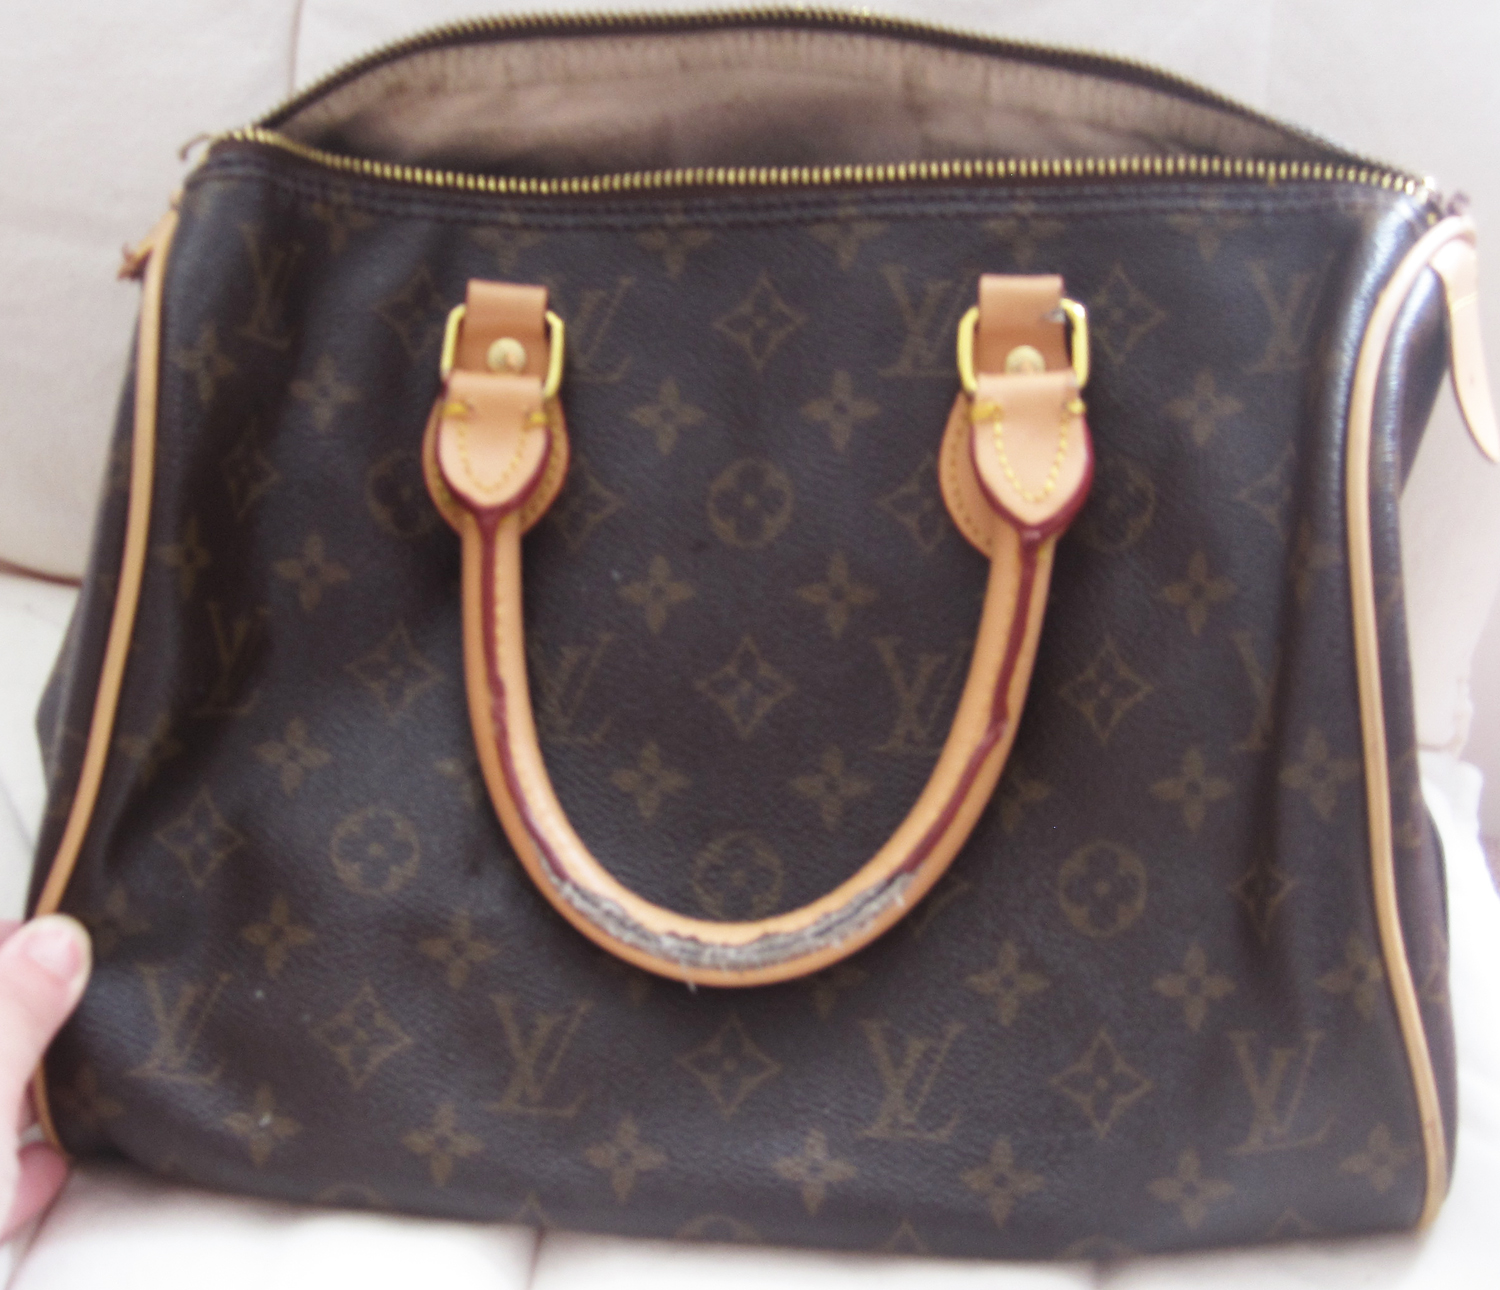 What's Inside of a Fake Louis Vuitton Speedy?